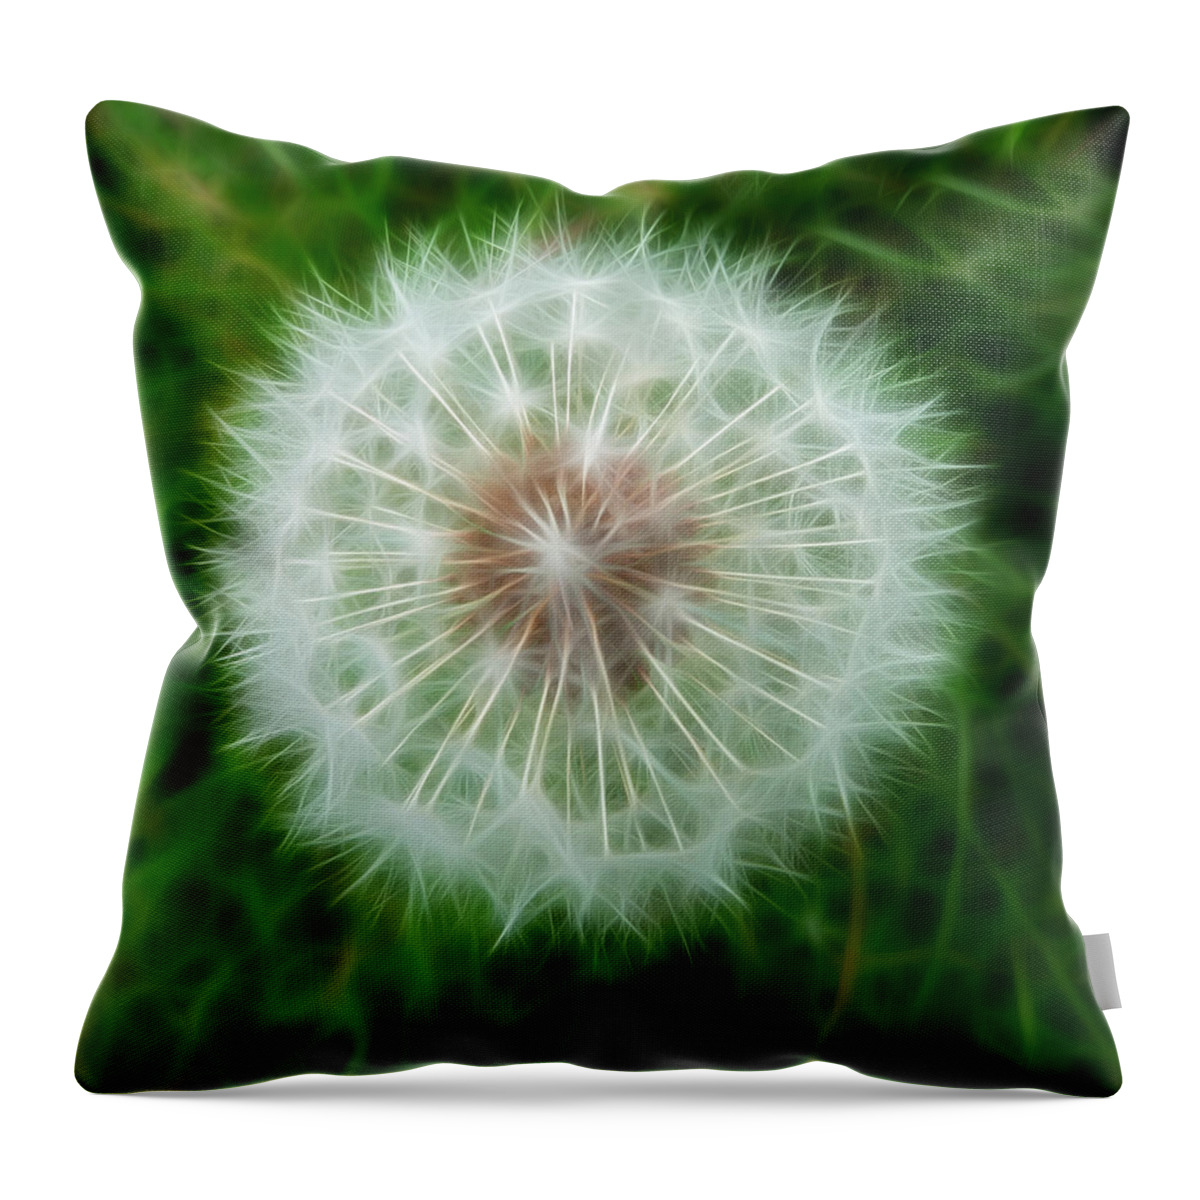 Dandelion Seed Head With Fractalius Effect Throw Pillow featuring the photograph Dandelion Seed Head by Lynn Bolt